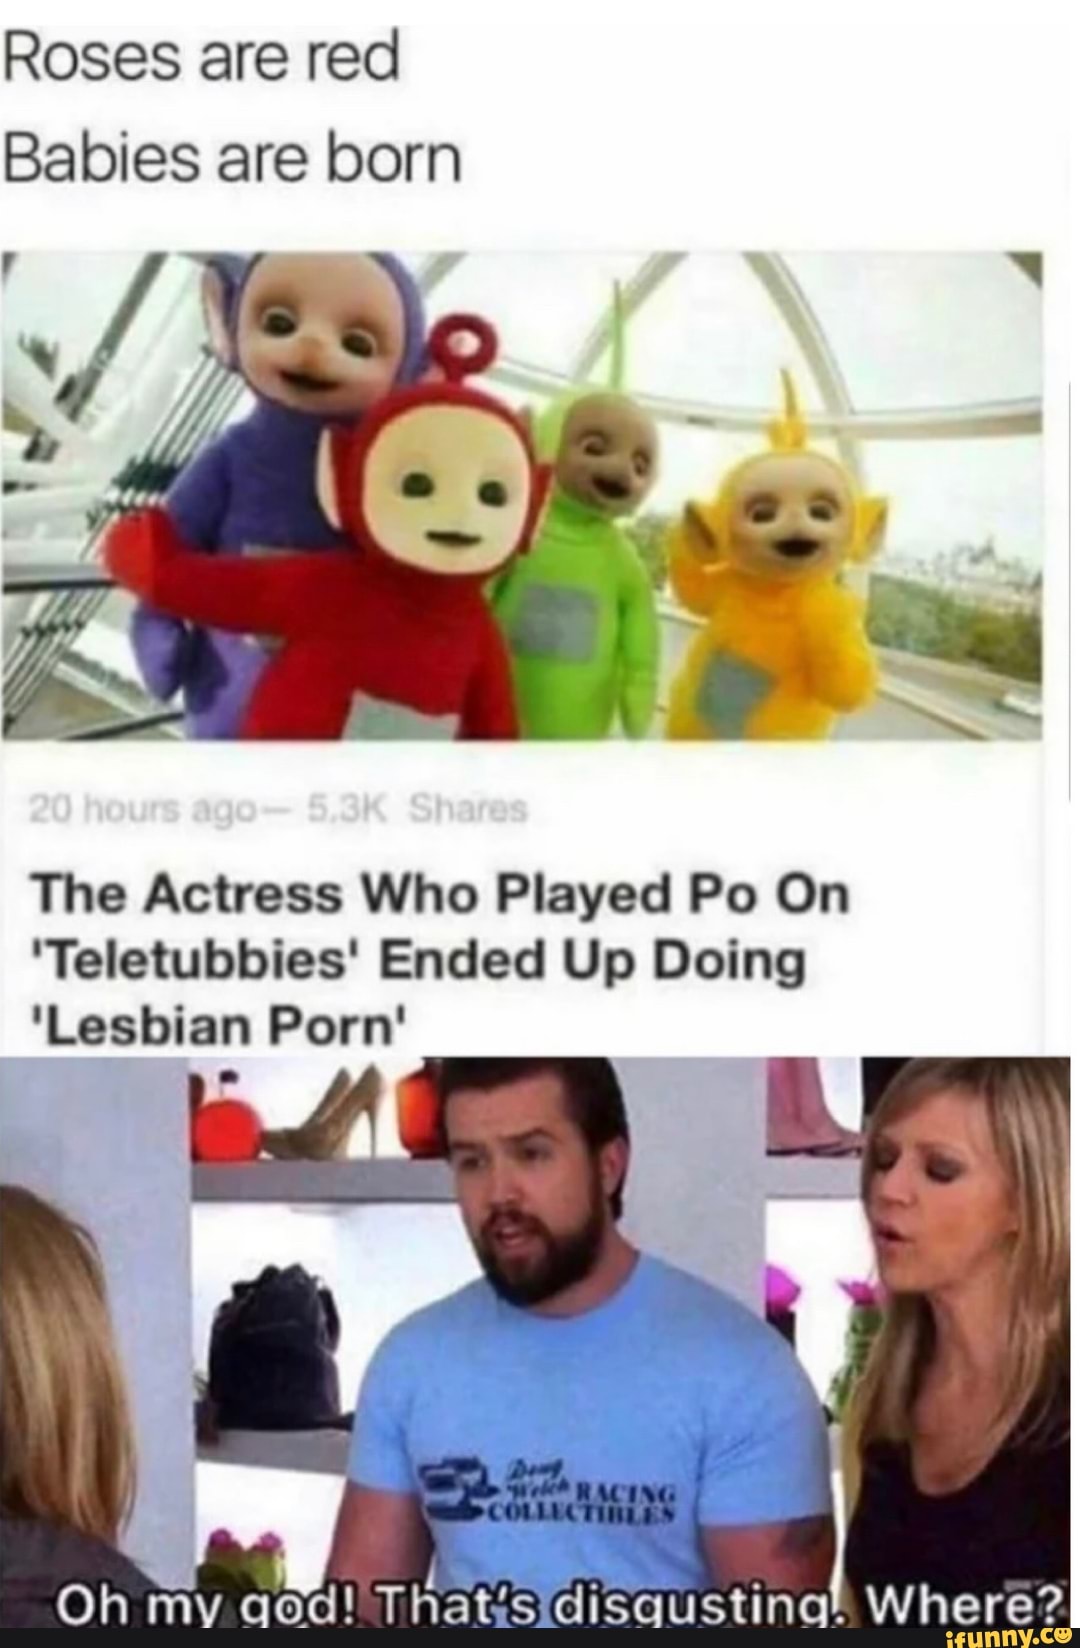 Pui Fan Lee Lesbian Porn - Roses are red Babies are born The Actress Who Played Po On 'Teletubbies'  Ended Up Doing 'Lesbian Porn' Oh Where? - iFunny